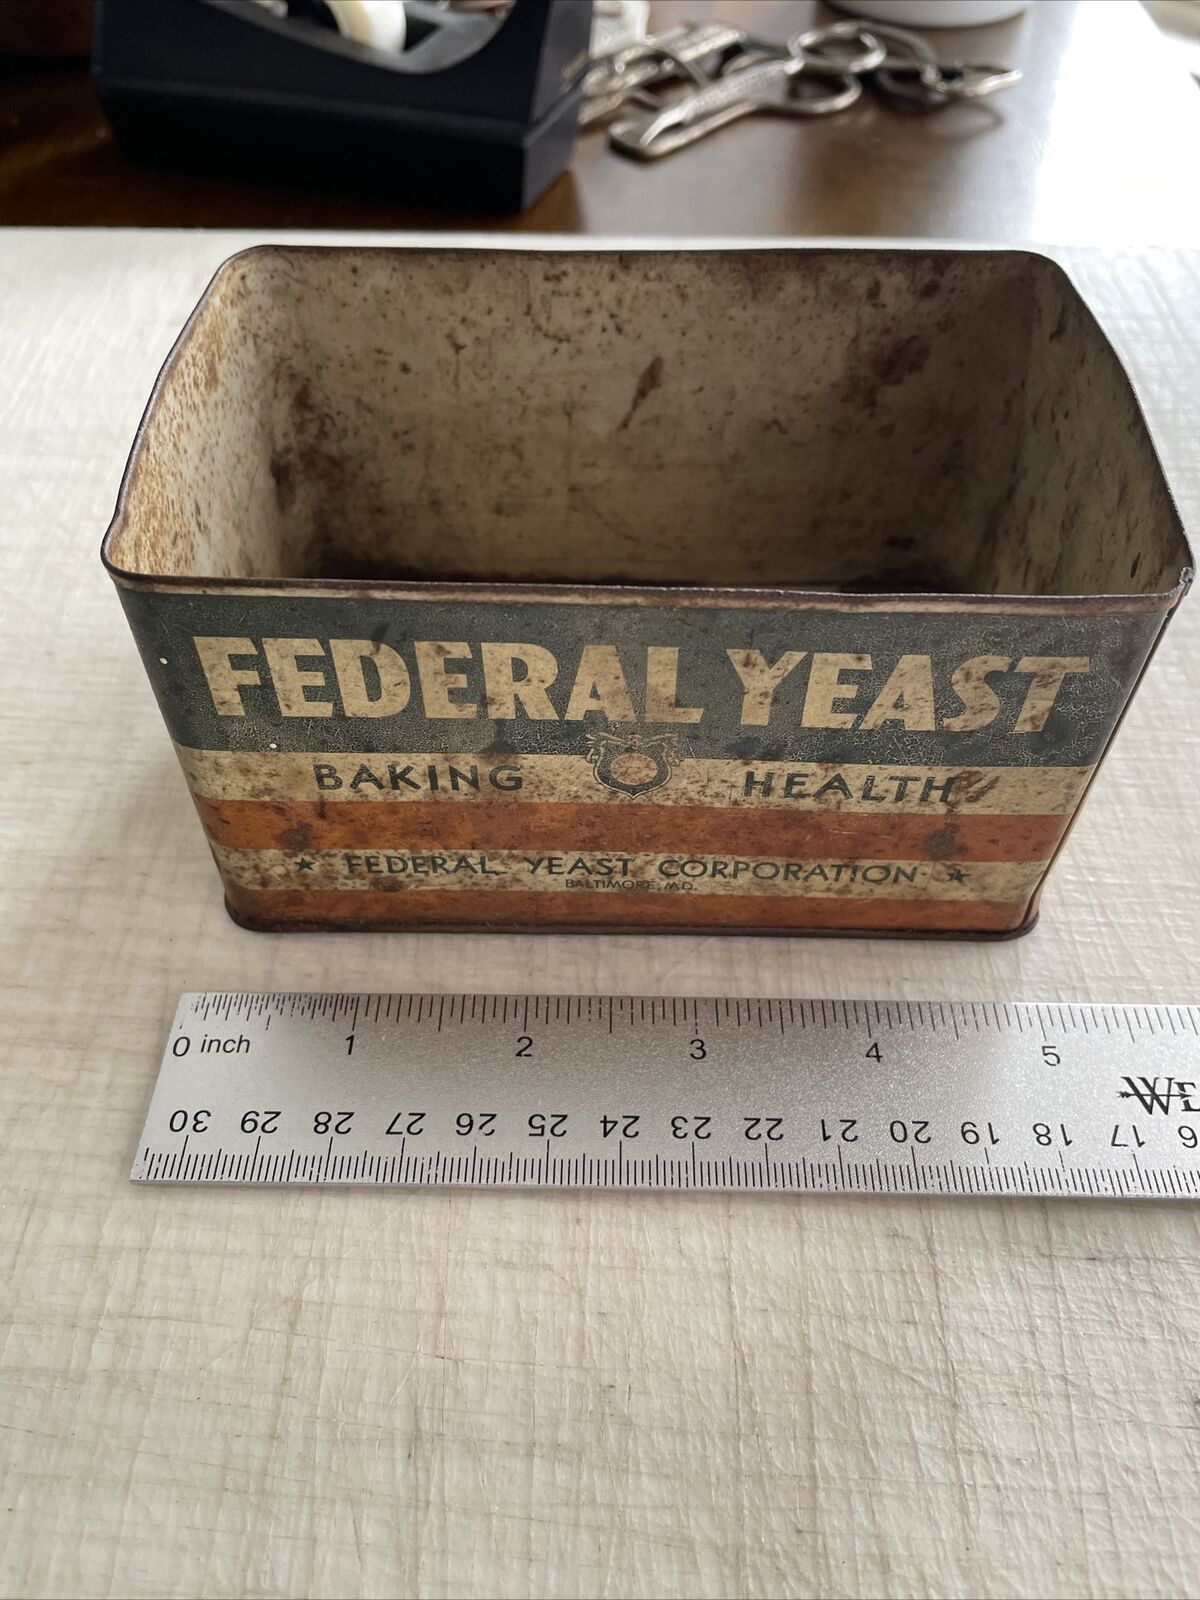 Vintage Federal Yeast Corporation Baltimore Maryland Tin Container (no lid)